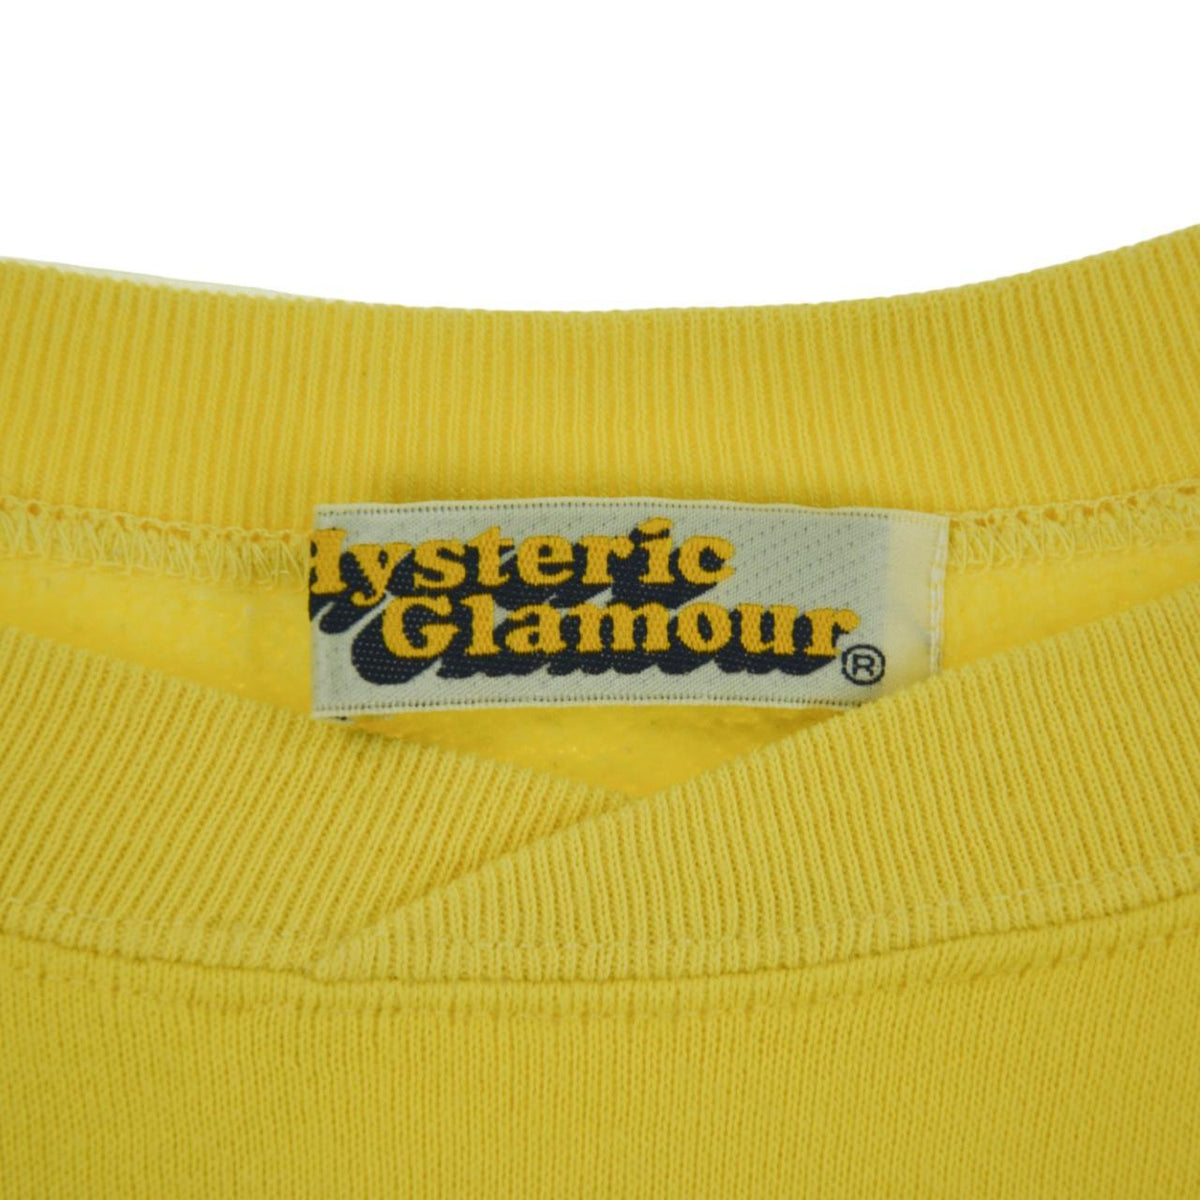 Vintage Hysteric Glamour F*cord Up Sweatshirt Woman’s Size S